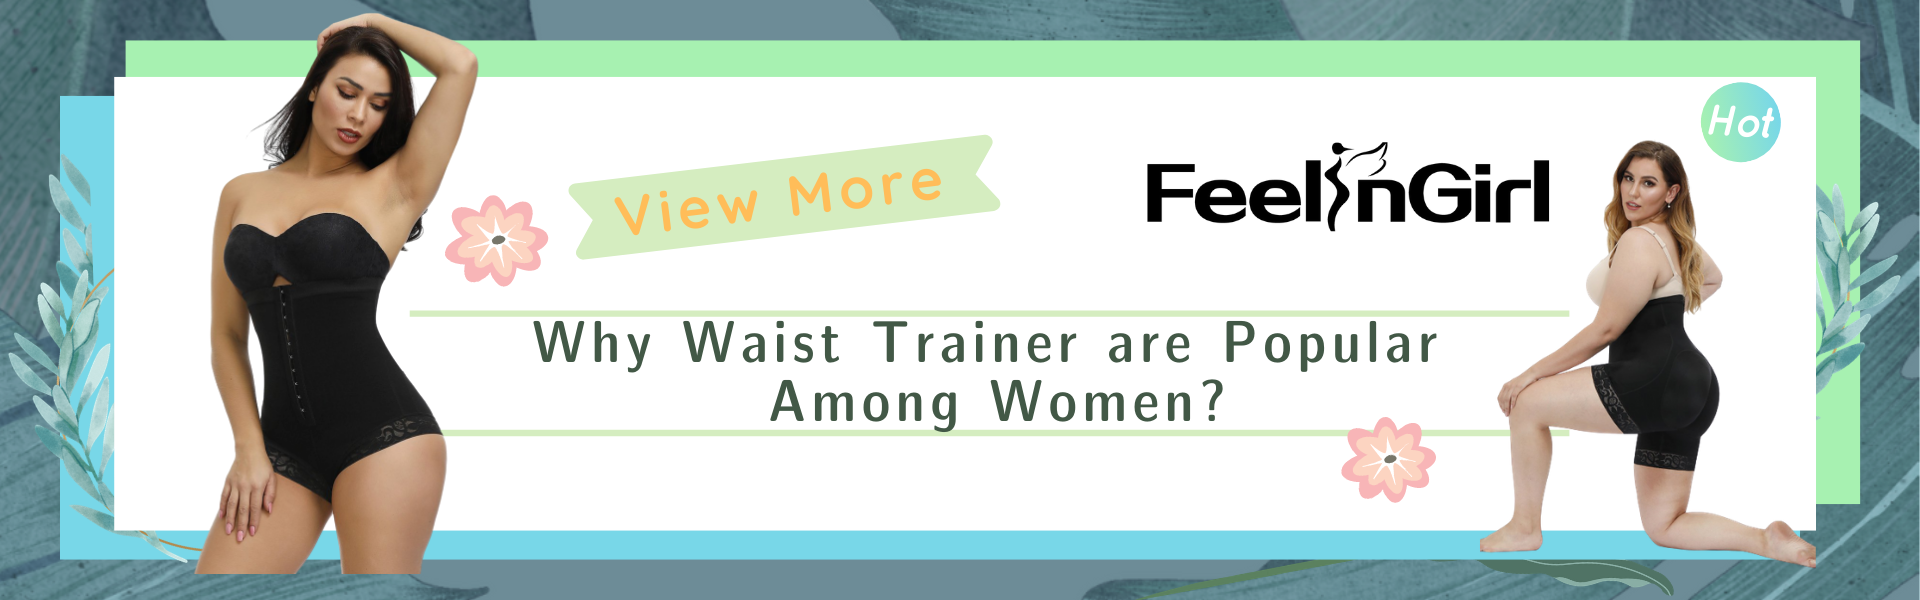 Why Waist Trainer are Popular Among Women?